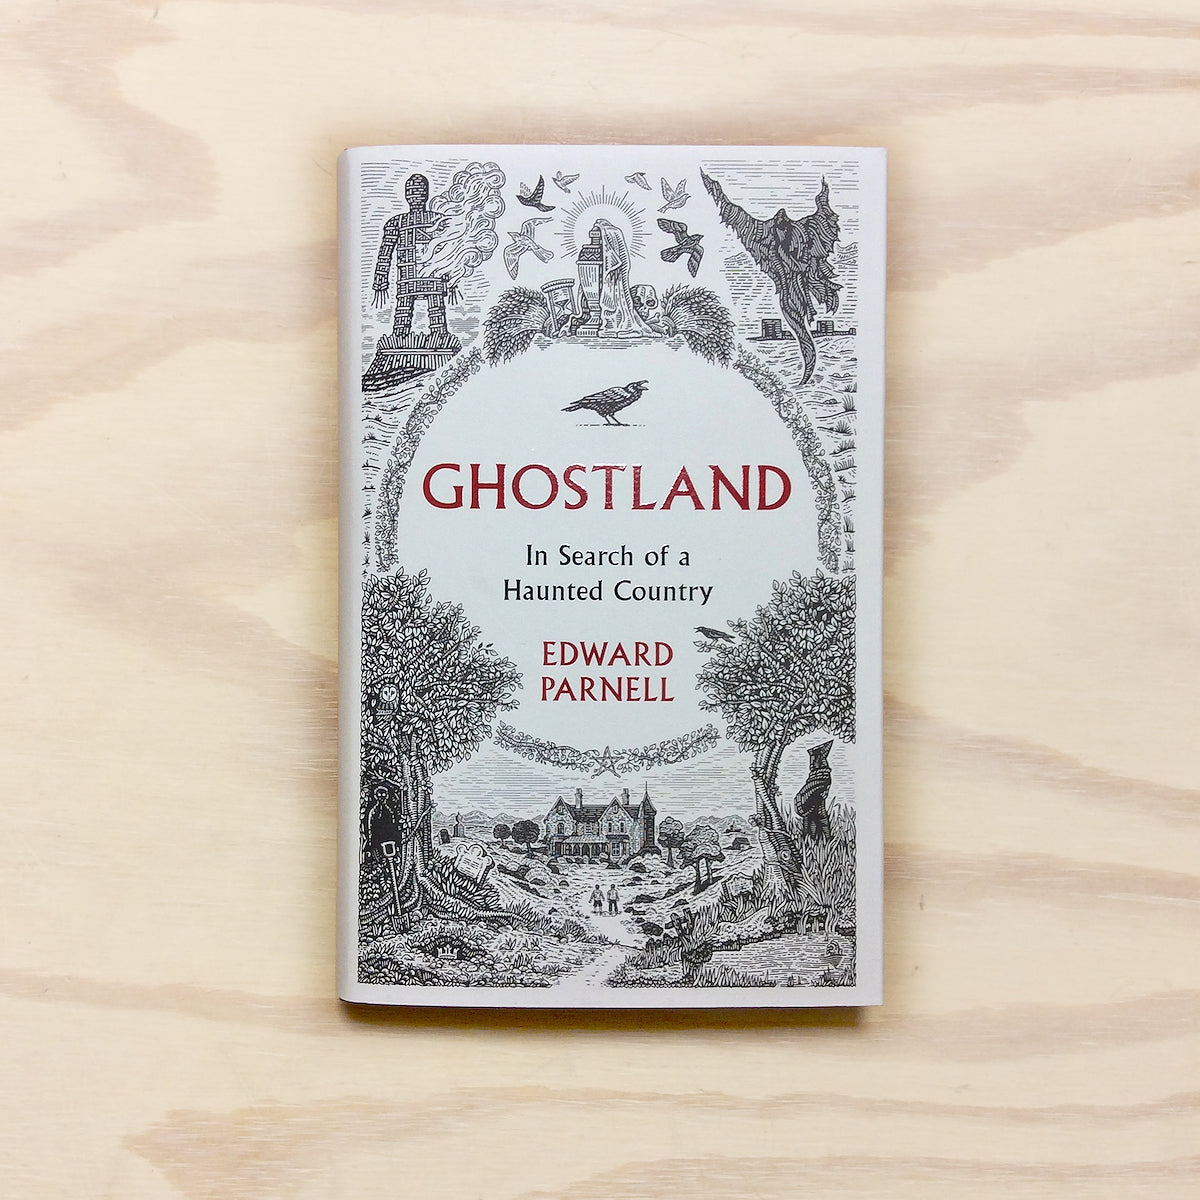 Ghostland - In Search of a Haunted Country